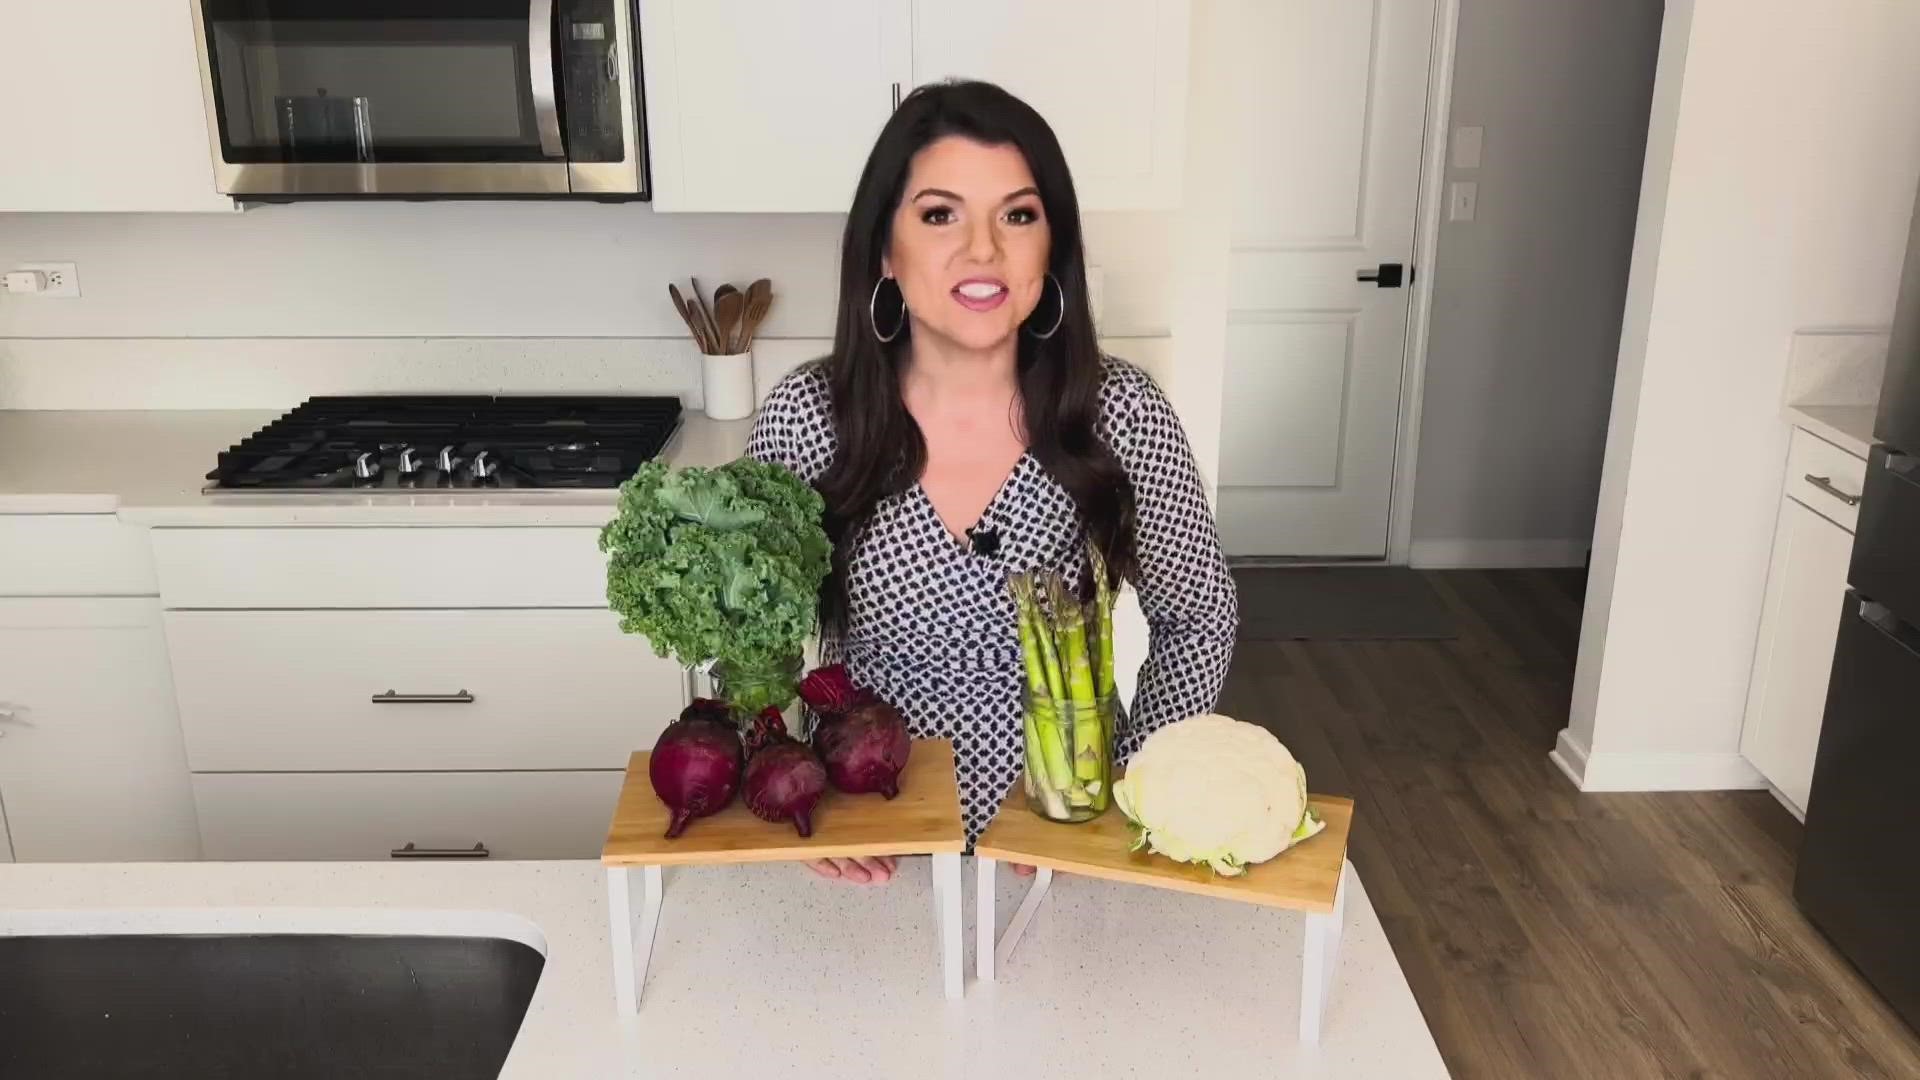 On this week's tip from Megan Evans, she shows us how to store vegetables and make them last a bit longer.